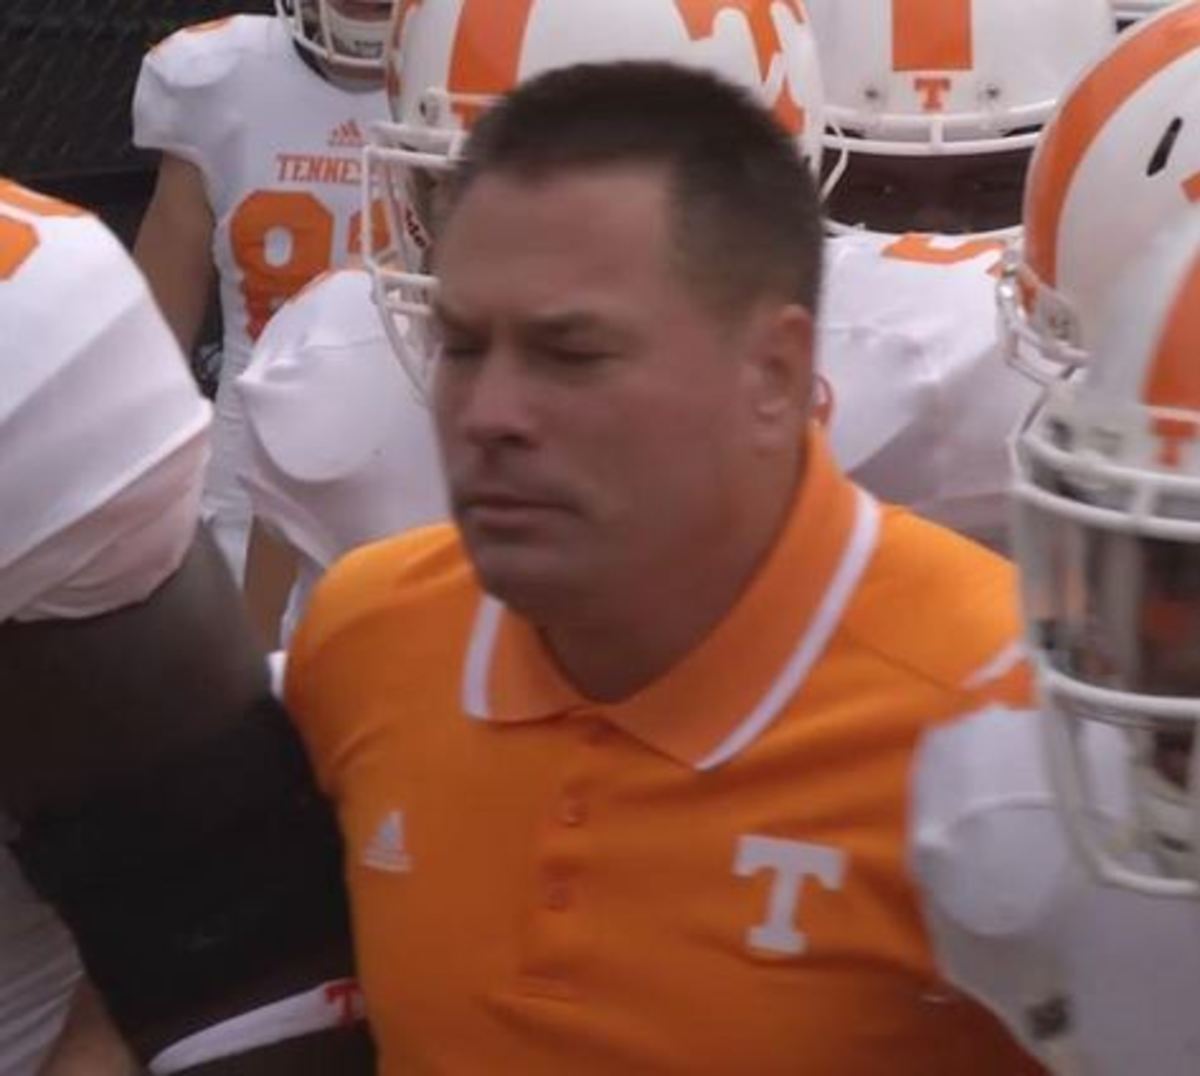 Butch Jones surrounded by his players.